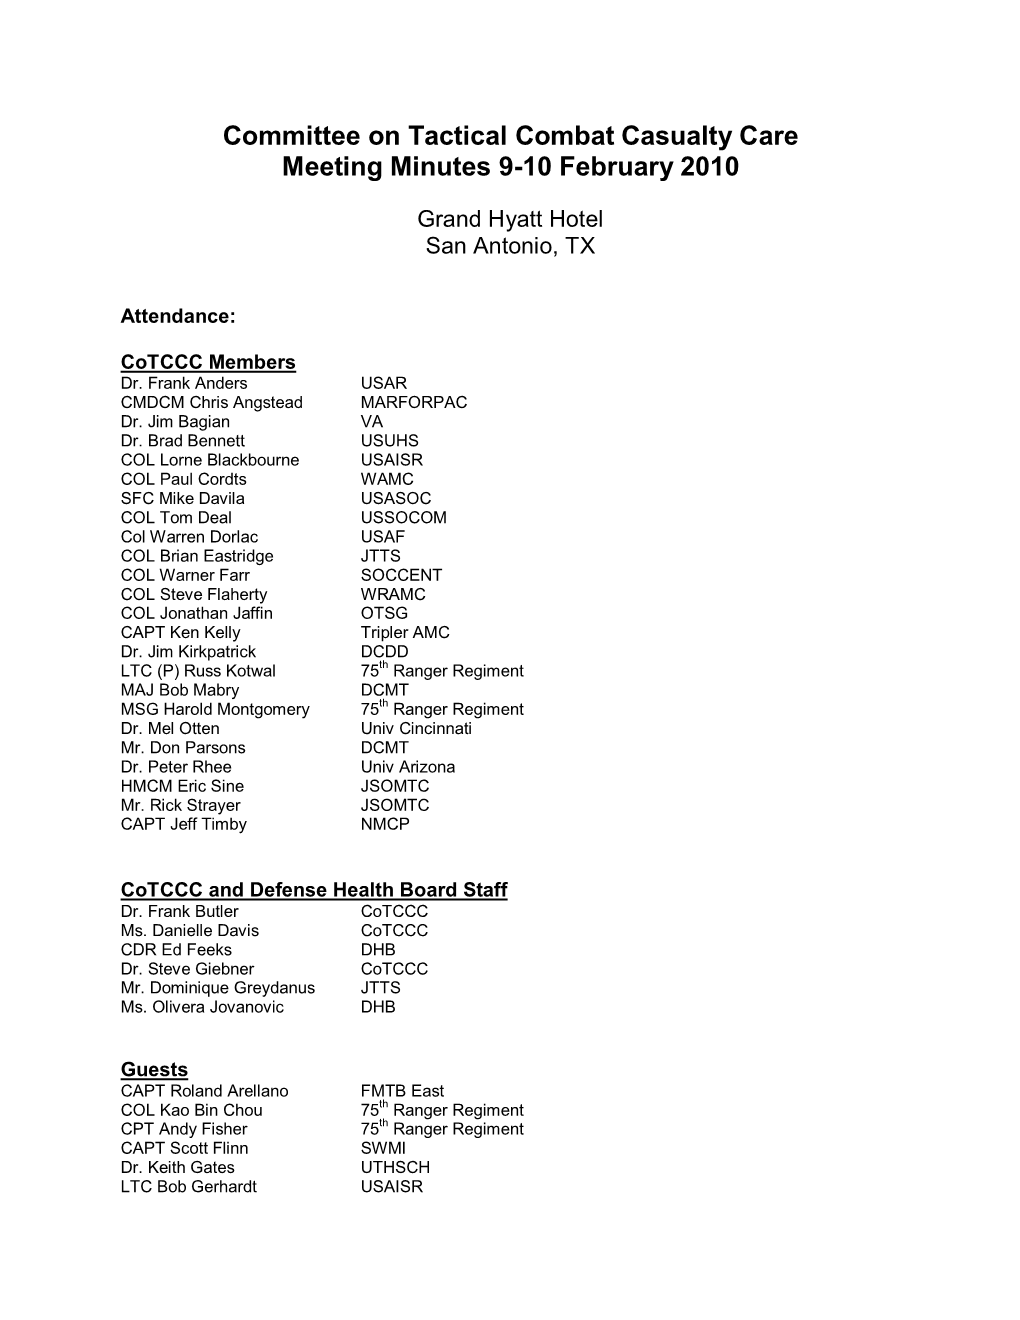 Committee on Tactical Combat Casualty Care Meeting Minutes 9-10 February 2010